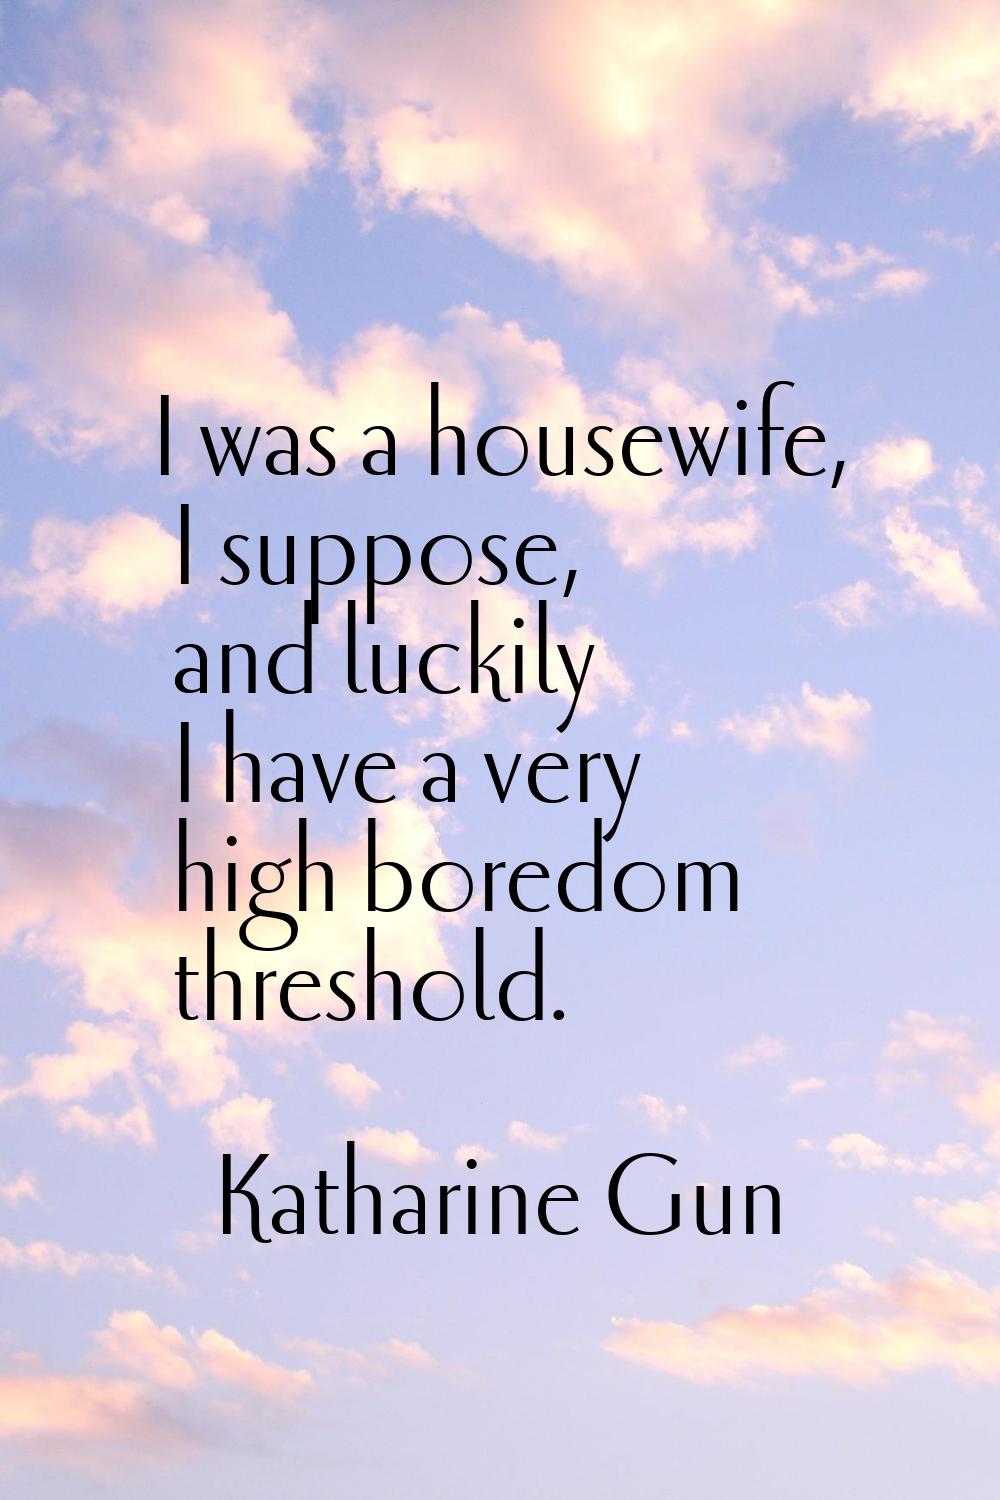 I was a housewife, I suppose, and luckily I have a very high boredom threshold.